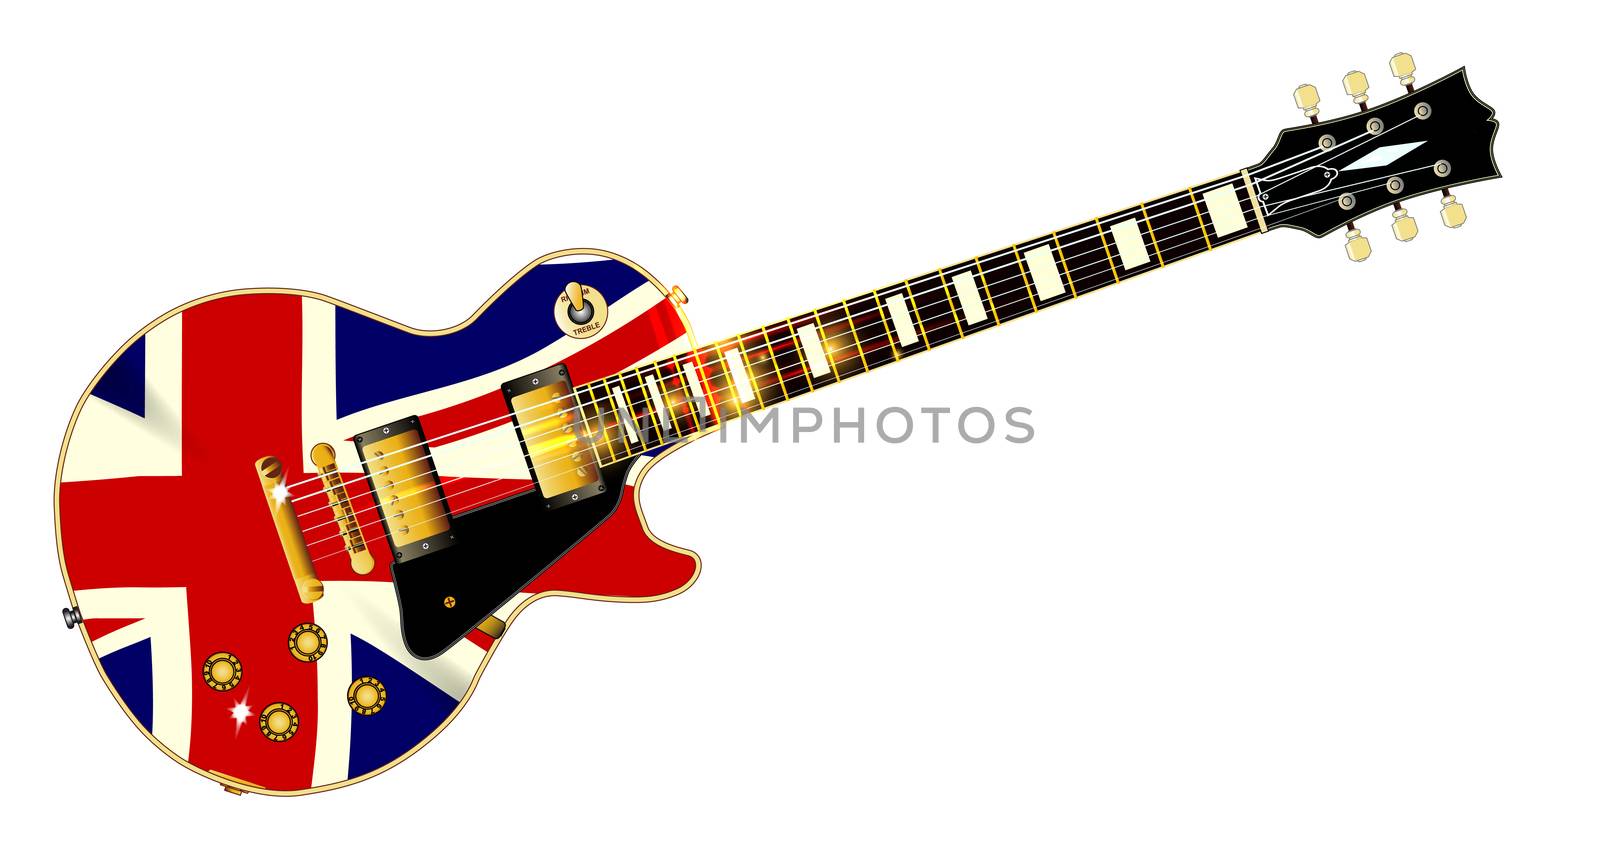 The definitive rock and roll guitar with the Texas flag isolated over a white background.